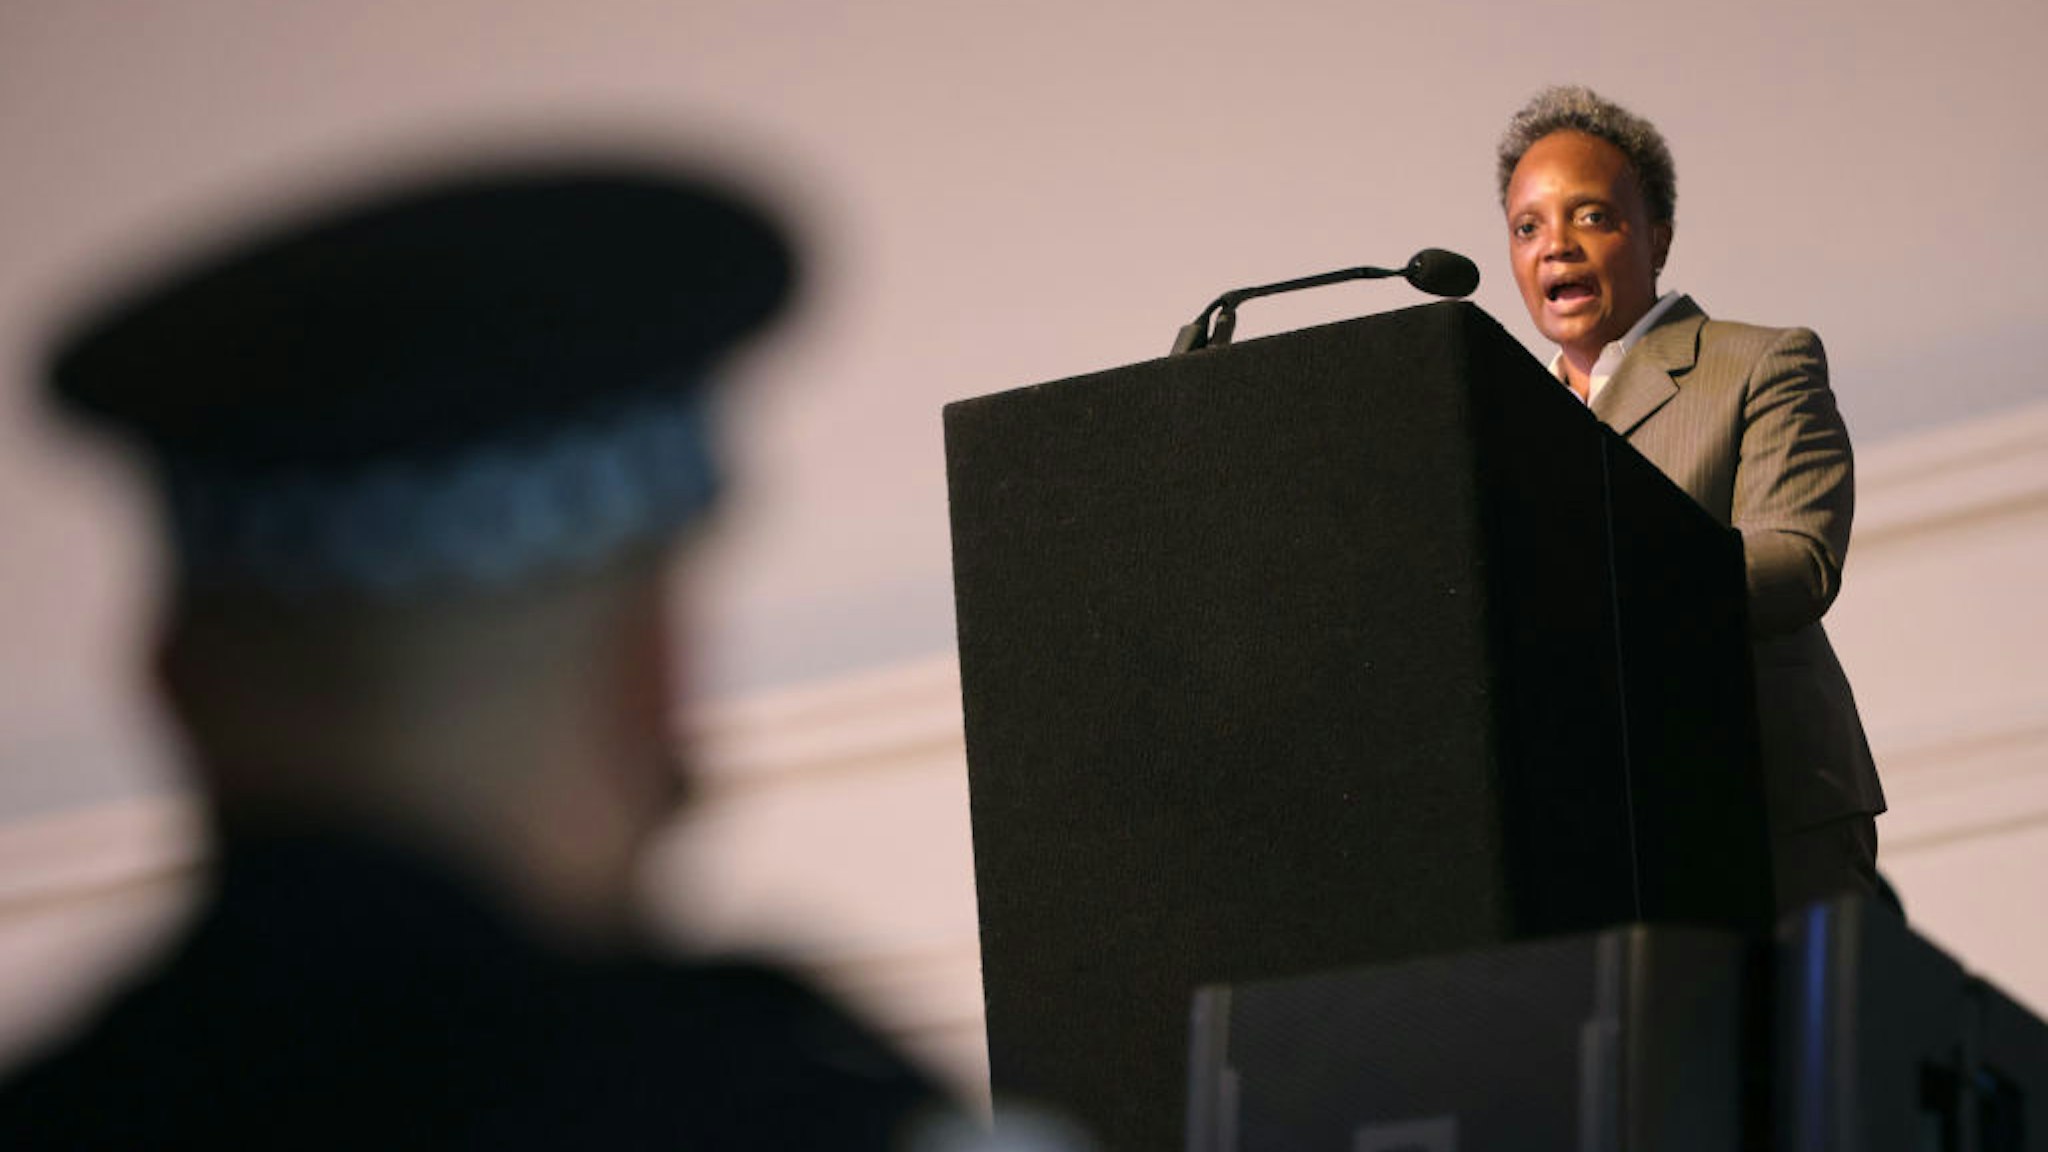 Chicago Mayor Lori Lightfoot speaks at a Chicago Police Department promotion and graduation ceremony on October 20, 2021 in Chicago, Illinois. The mayor has been sparring with the union that represents Chicago police after the city ordered police to state their COVID-19 vaccination status. With only about 65 percent of the city's police in compliance the city has started to place those who have not on unpaid leave. (Photo by Scott Olson/Getty Images)